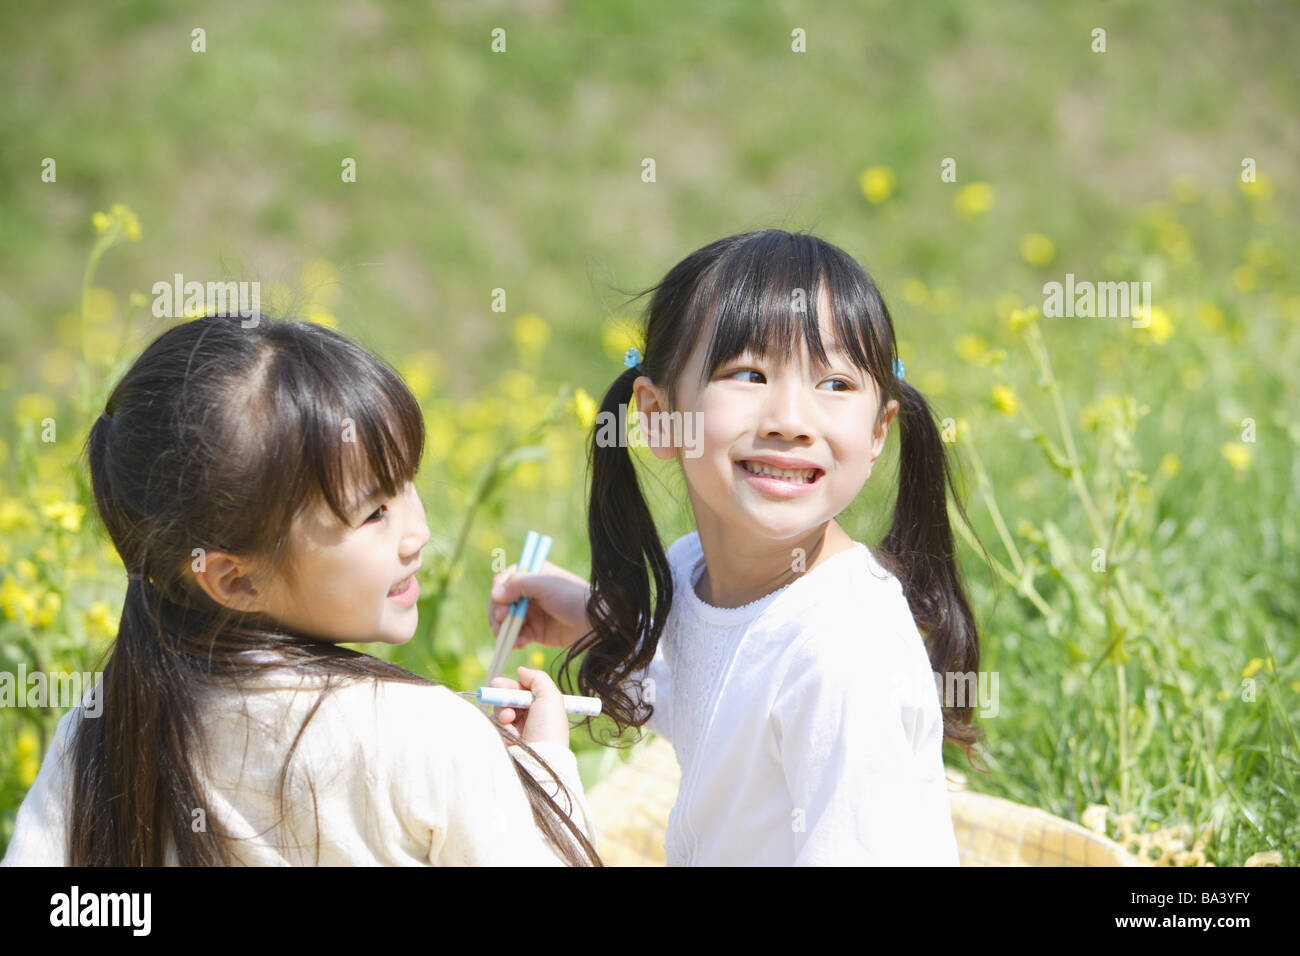 Japanese girls eating lunch together Stock Photo